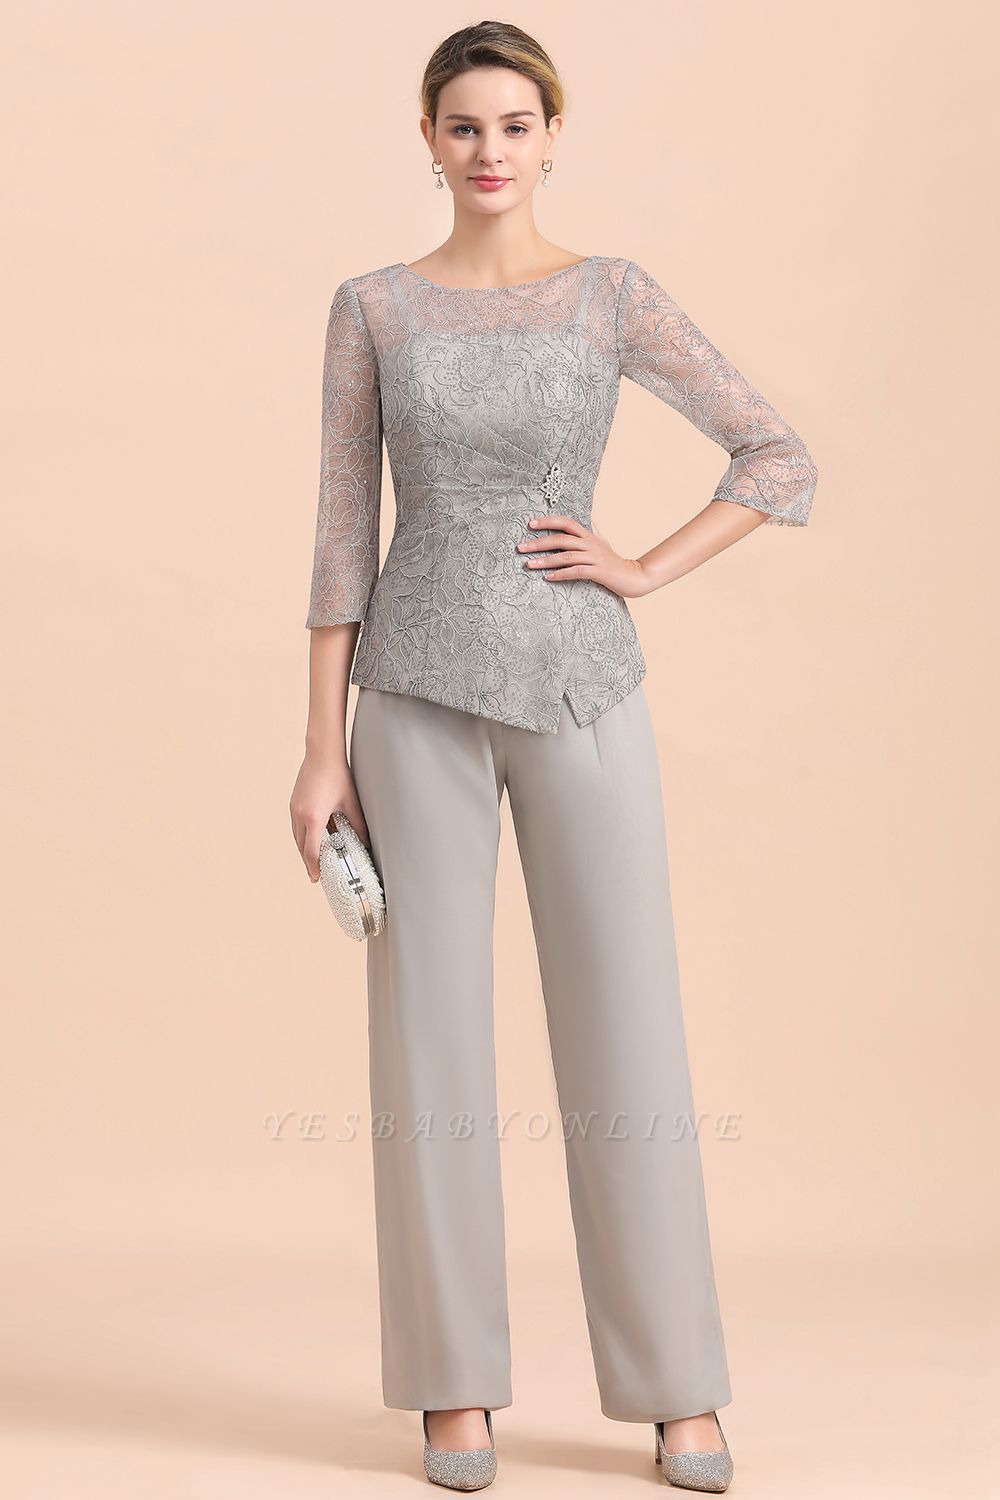 Elegant Smokey Blue Round Neck Half Sleeves Lace Mother of Bride Pants Suits